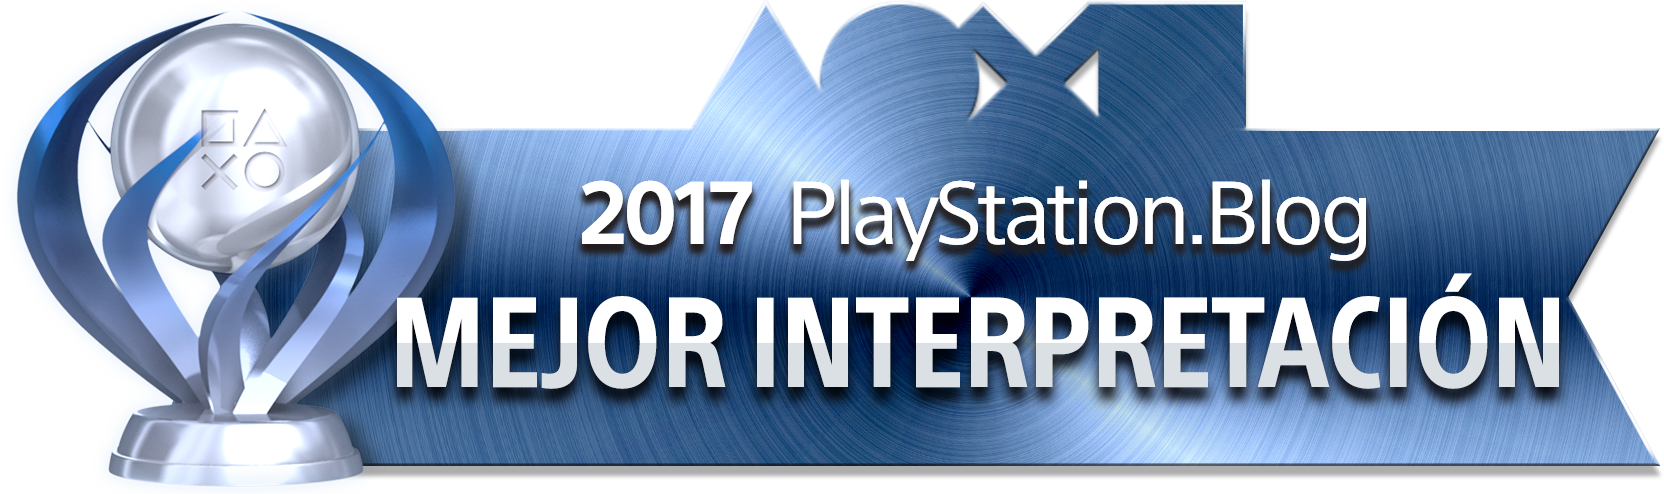 PlayStation Blog Game of the Year 2017 - Best Performance (Platinum)